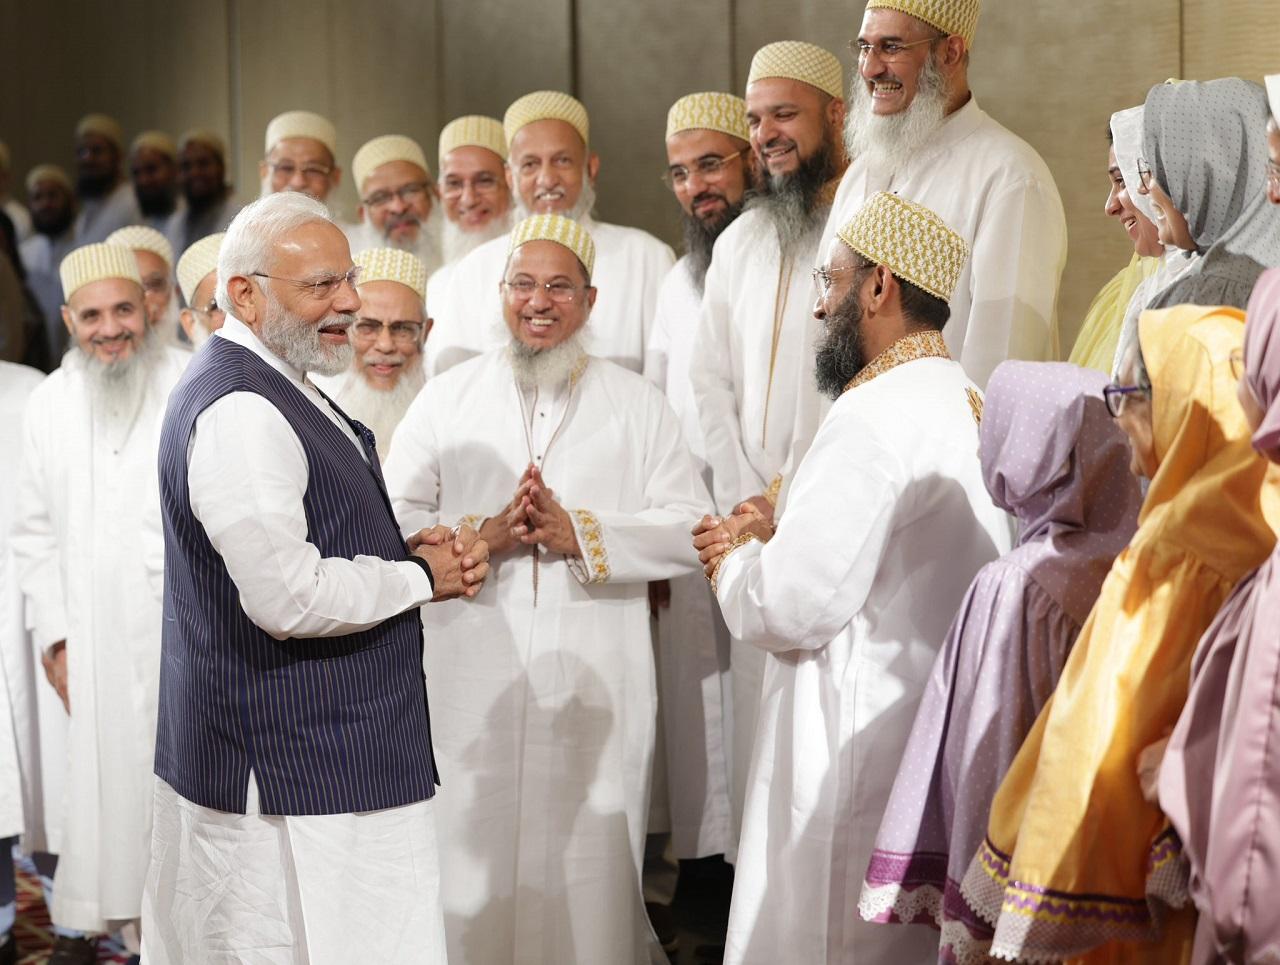 PM Modi also met the Grand Mufti of Egypt Dr Shawki Ibrahim Abdel-Karim Allam and interacted with the members of the Indian diaspora (Pic/PTI)